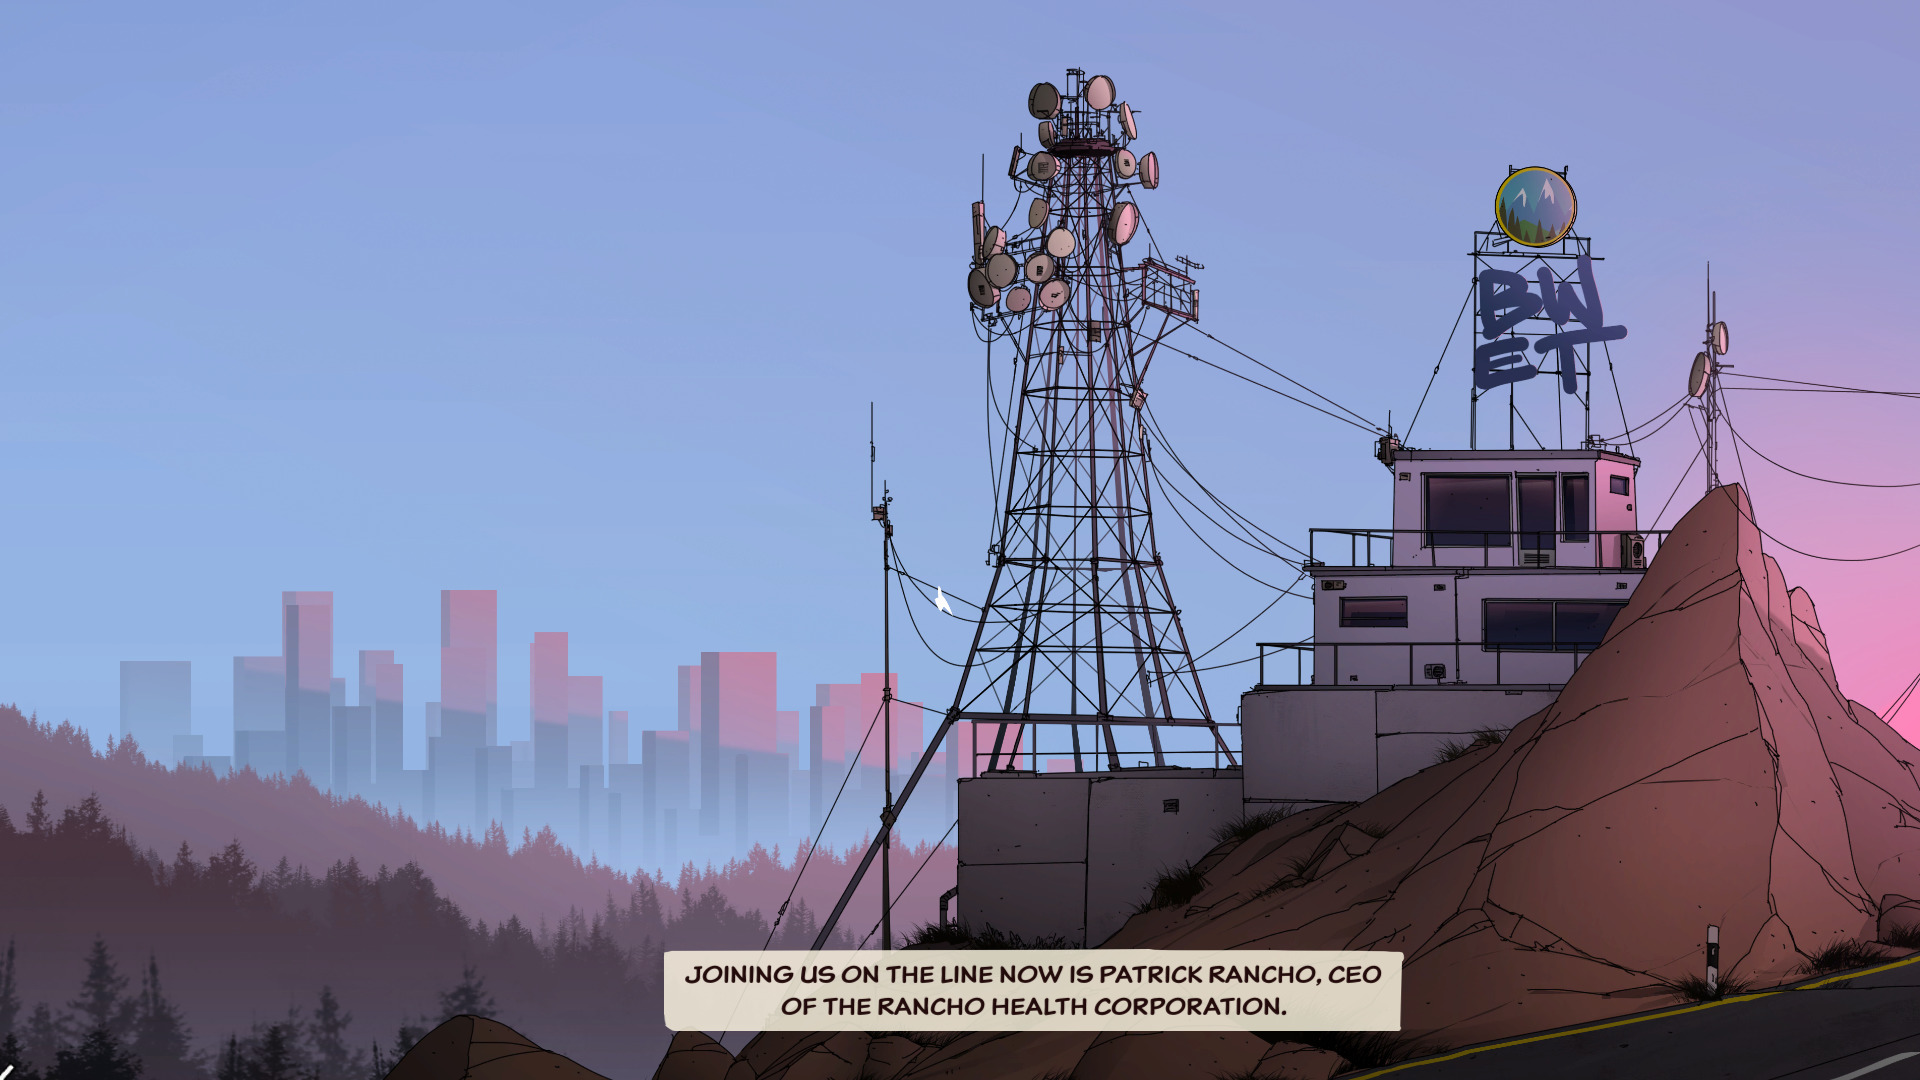 Unforeseen Incidents download the last version for ipod